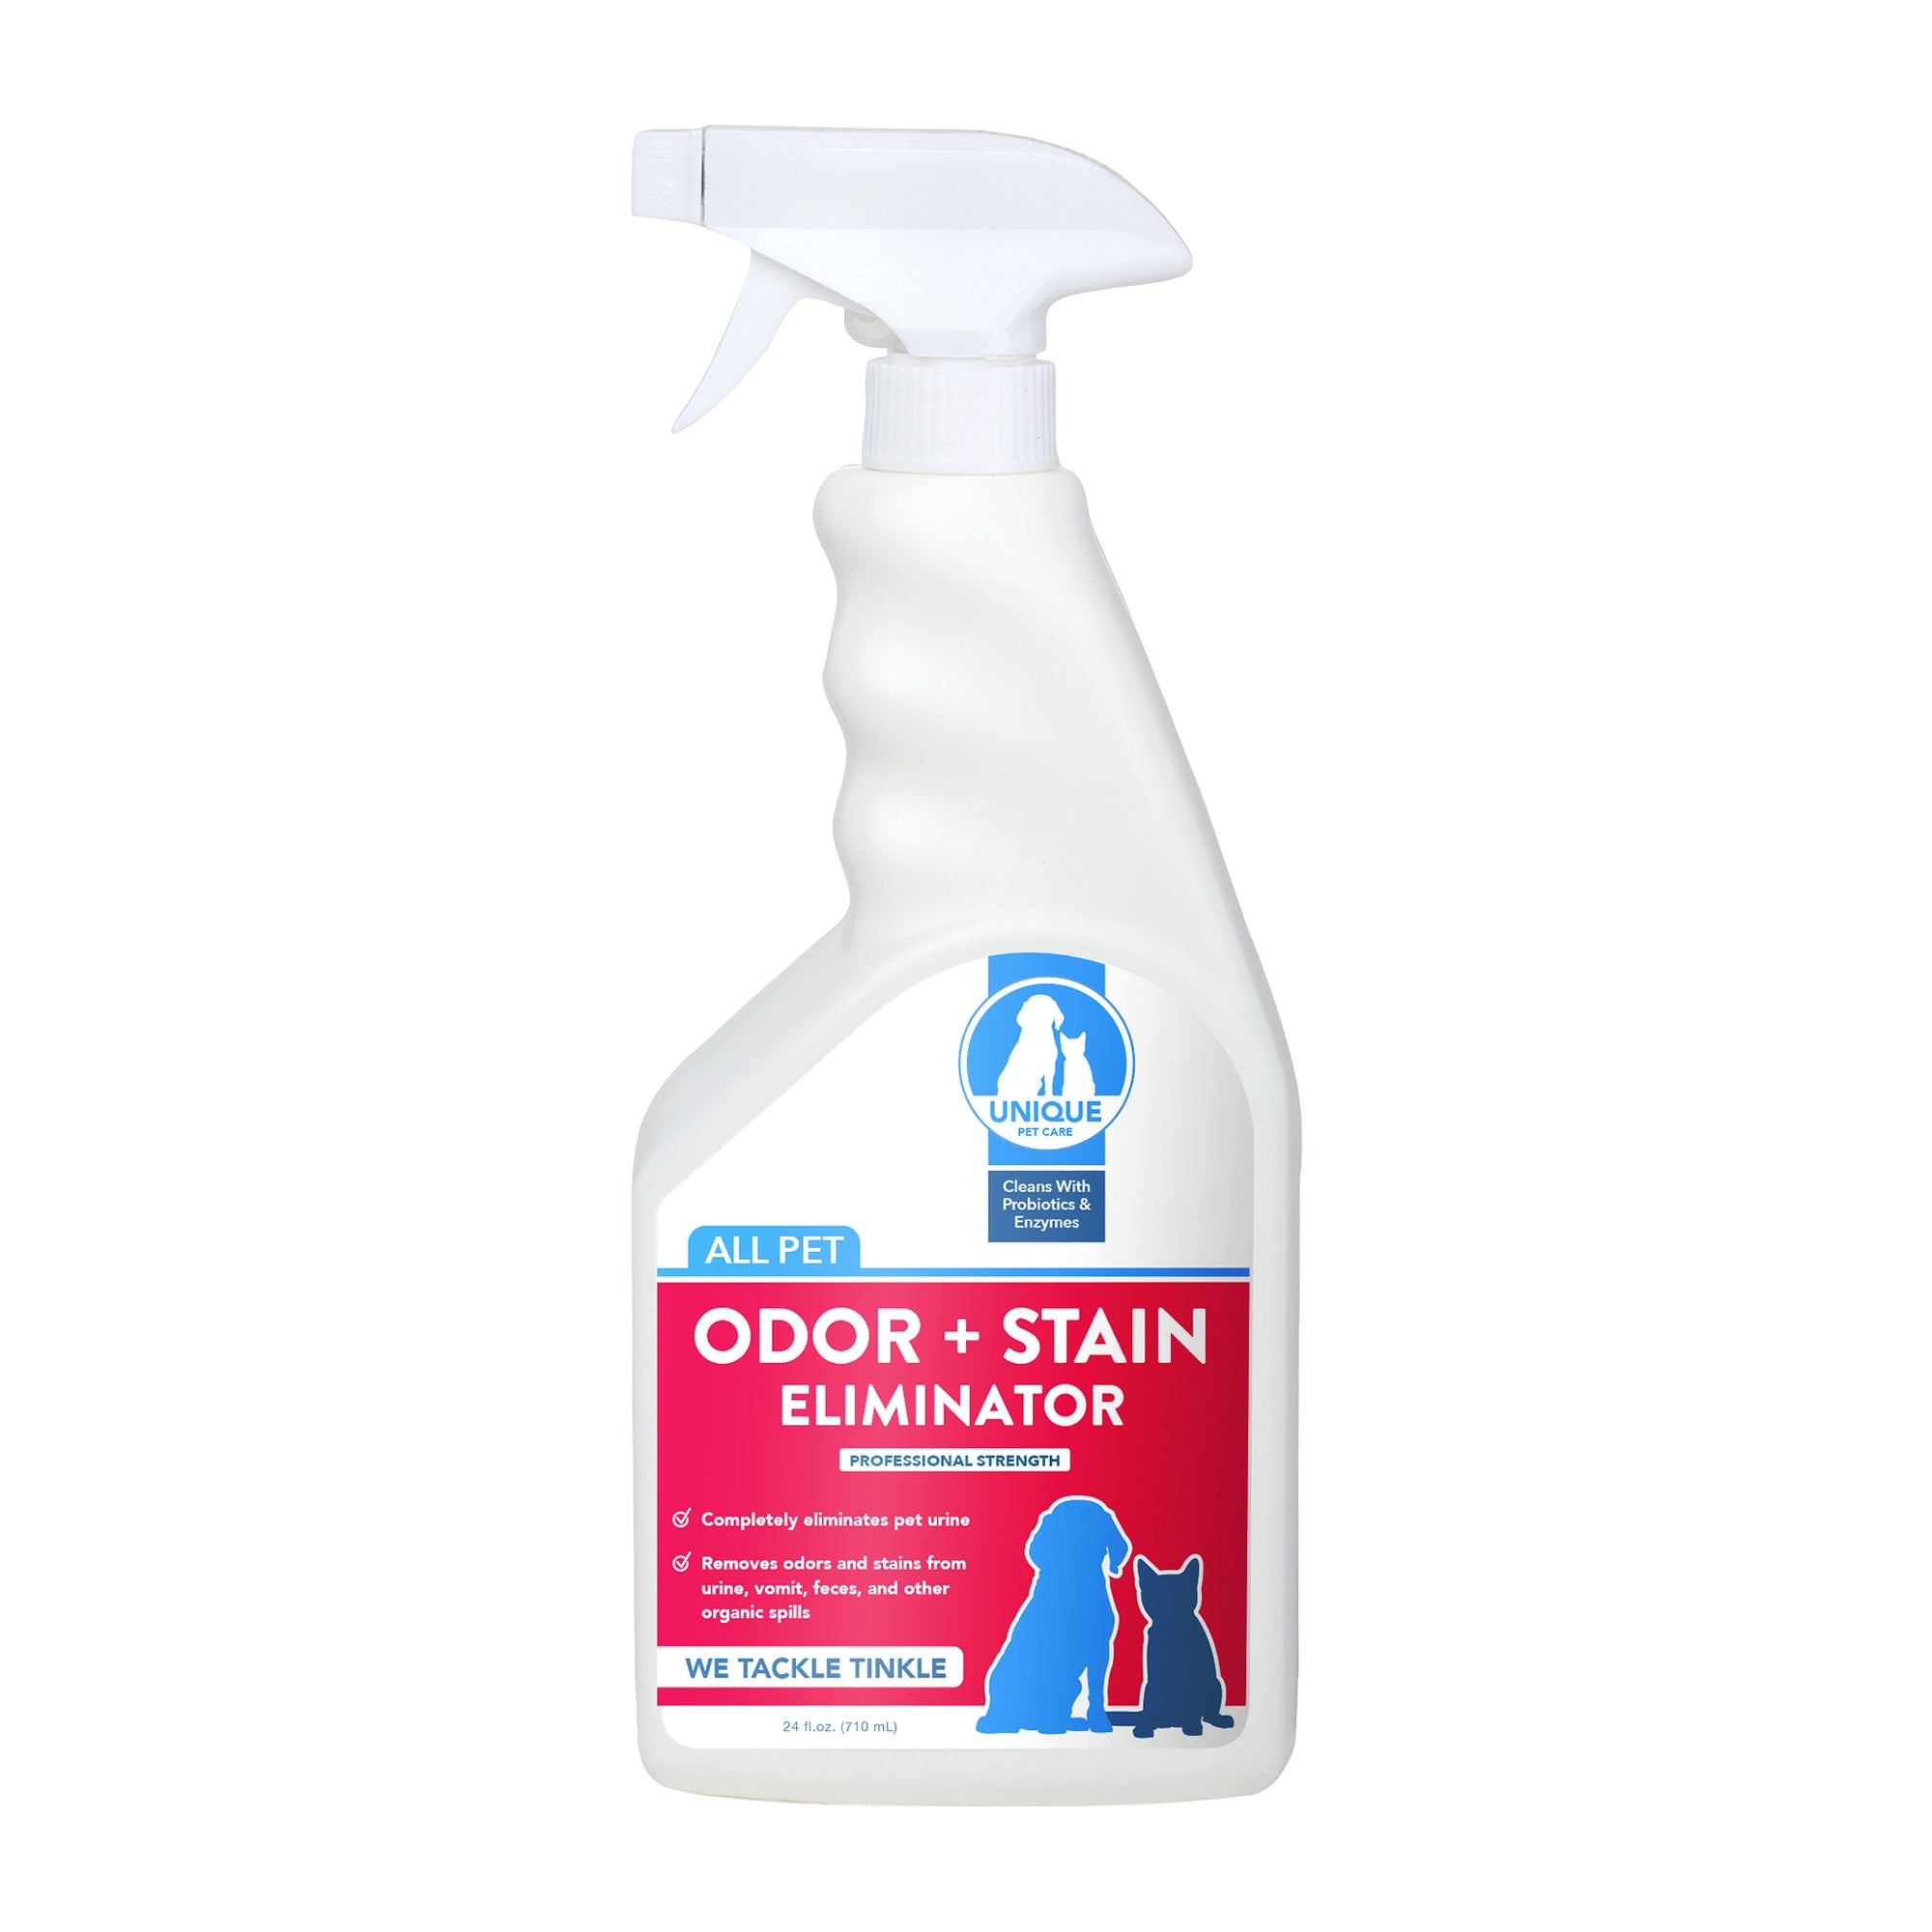 Unique Pet Odor and Stain Eliminator RTU Trigger Spray Formulated with Trust - Stain odor and urine remover - works fast to remove the worst stains and odors on all surfaces